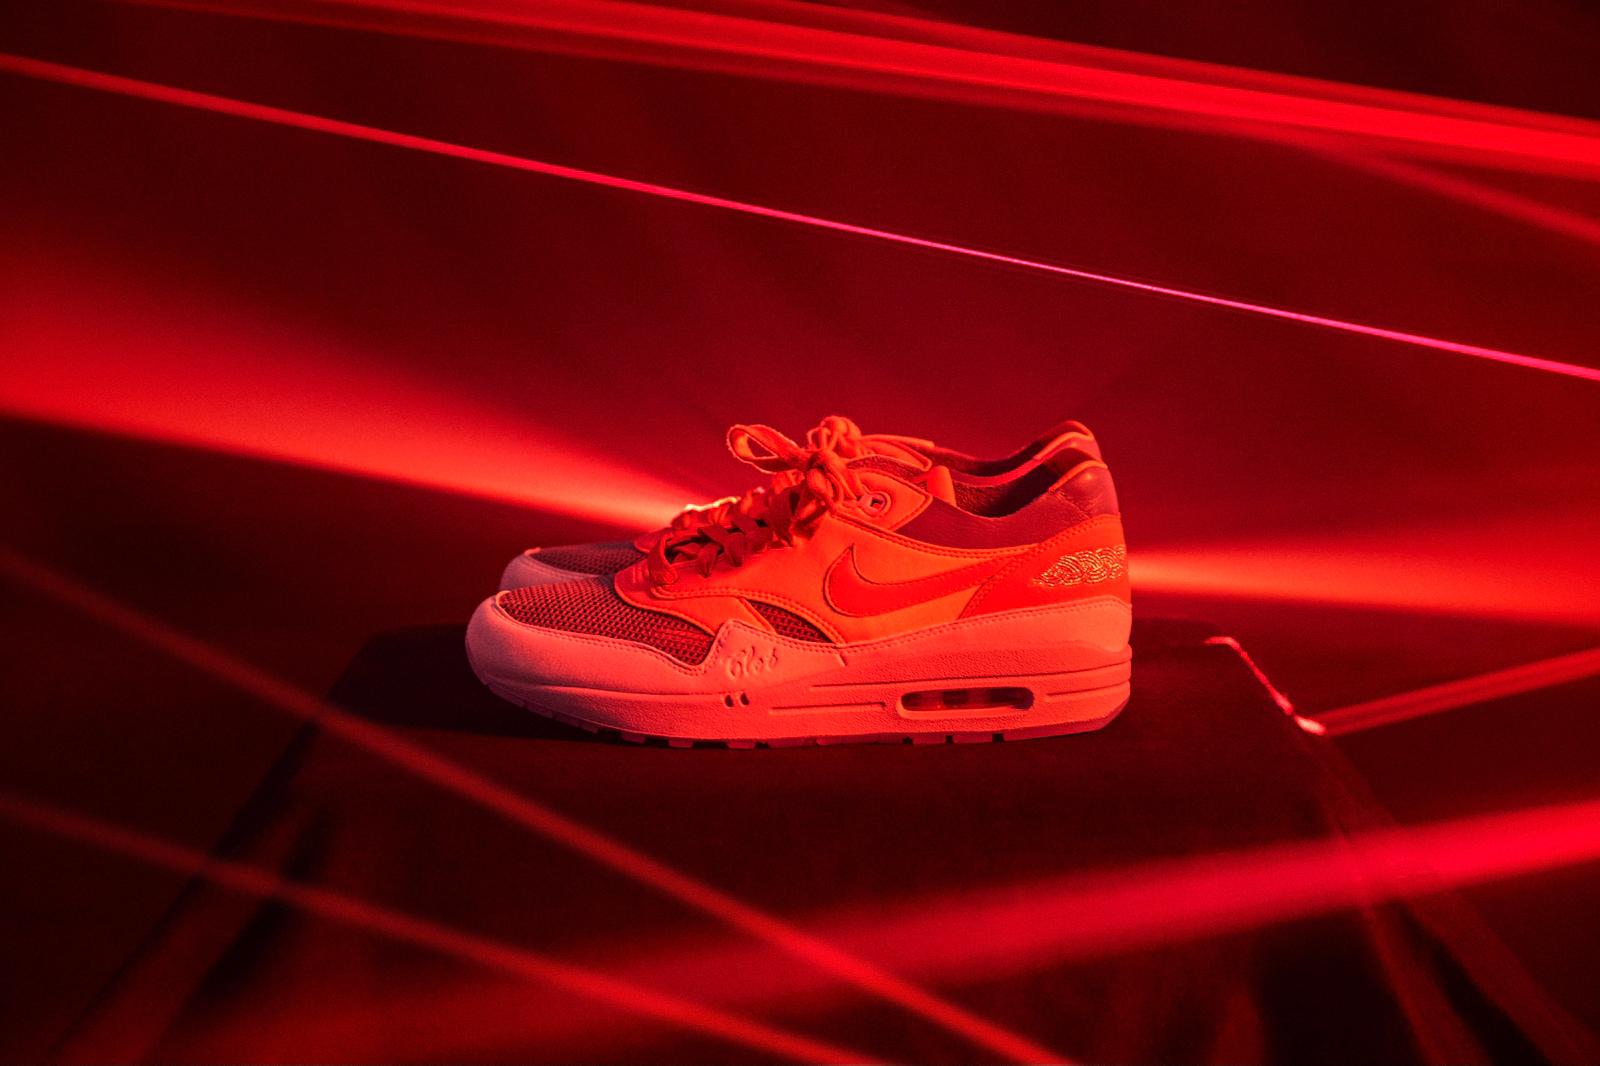 CLOT and to Release the Legendary CLOT x Nike Air Max 1 “K.O.D.” – JUICESTORE